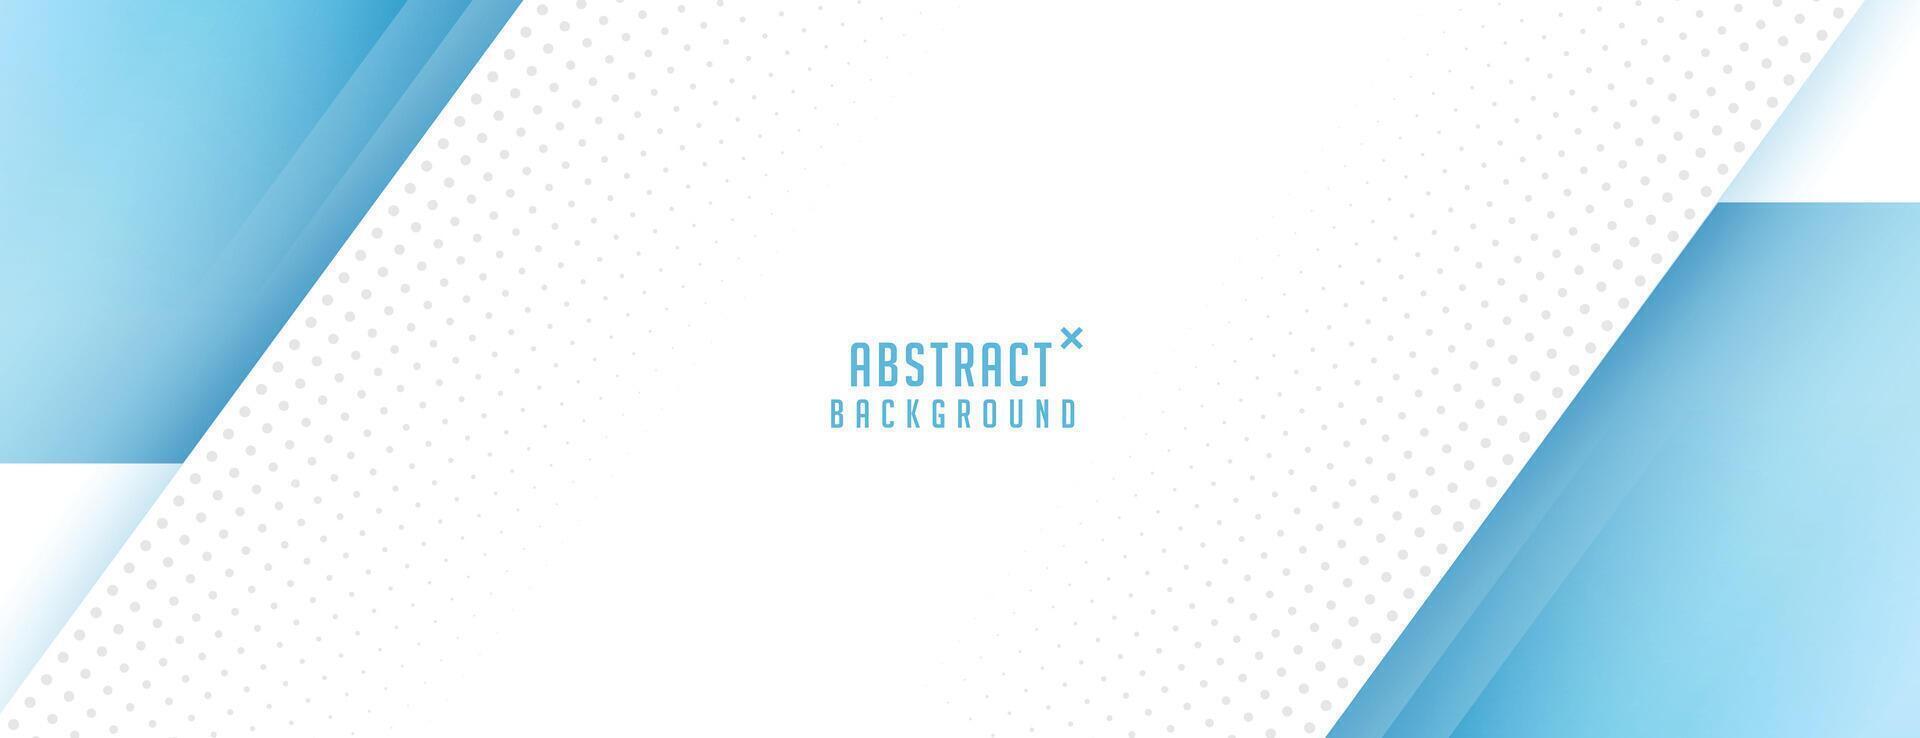 modern style abstract background with half tone effect vector